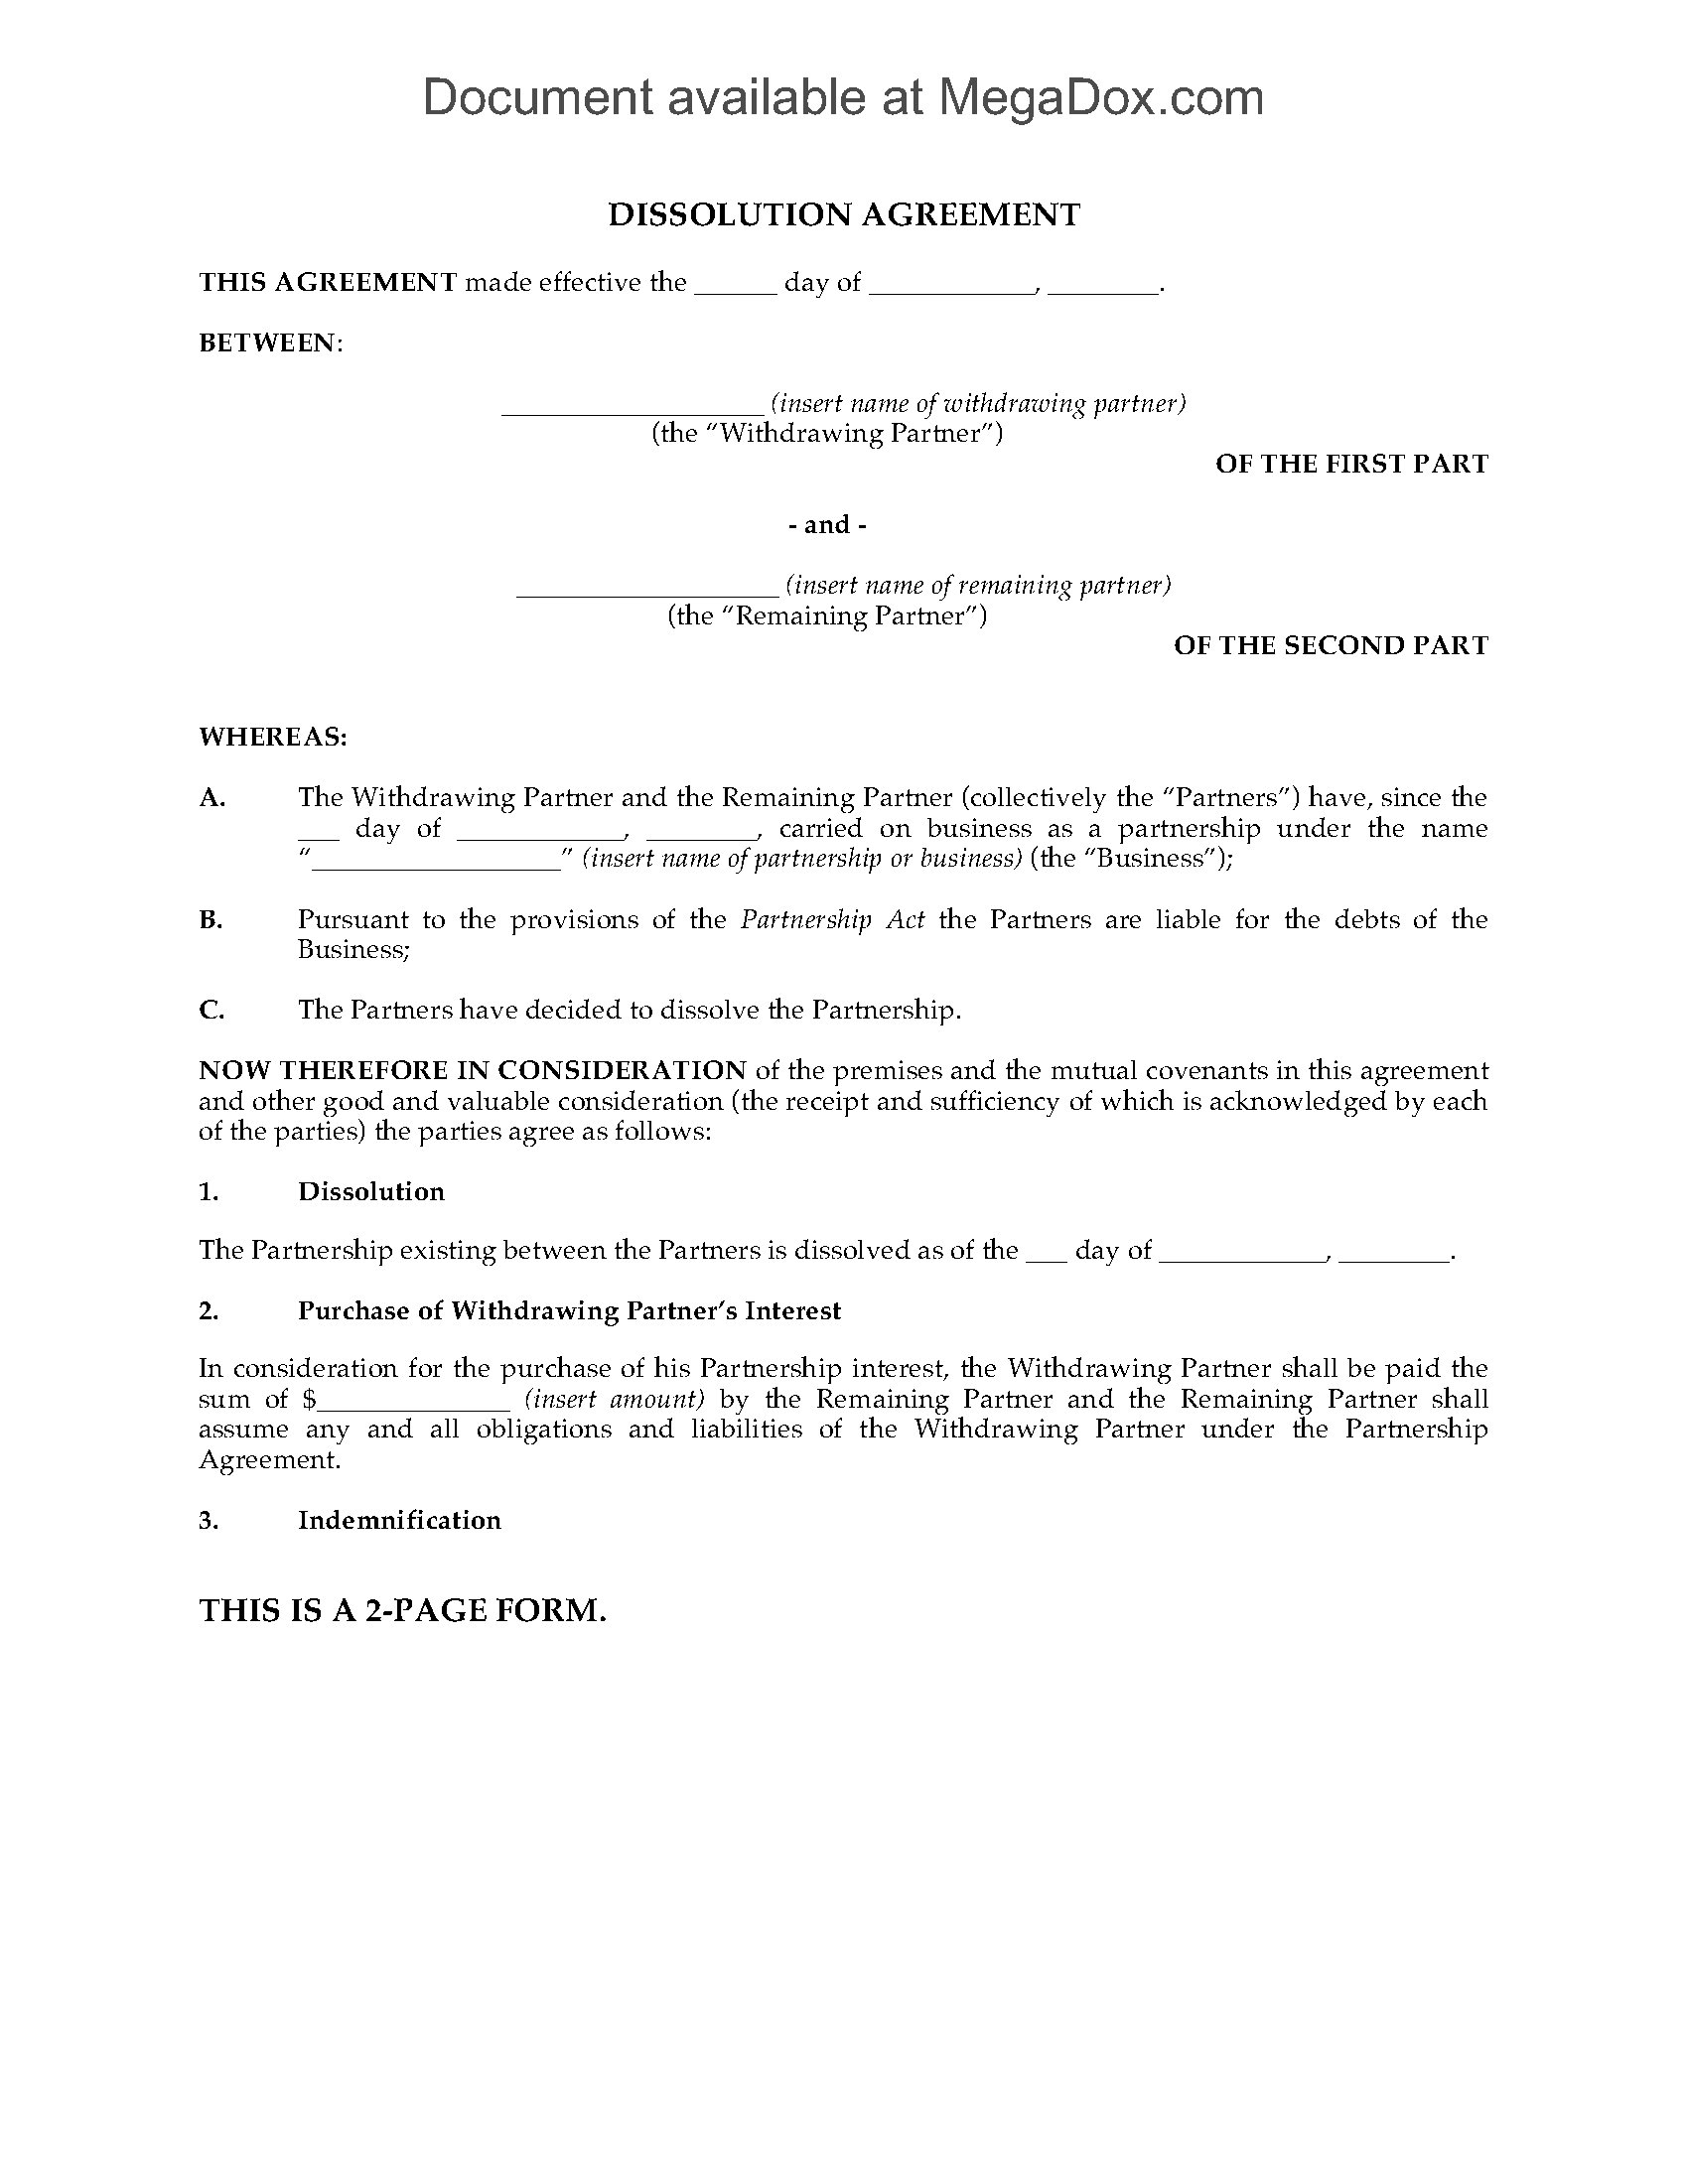 Alberta Partnership Dissolution Agreement  Legal Forms and Intended For dissolution of partnership agreement template